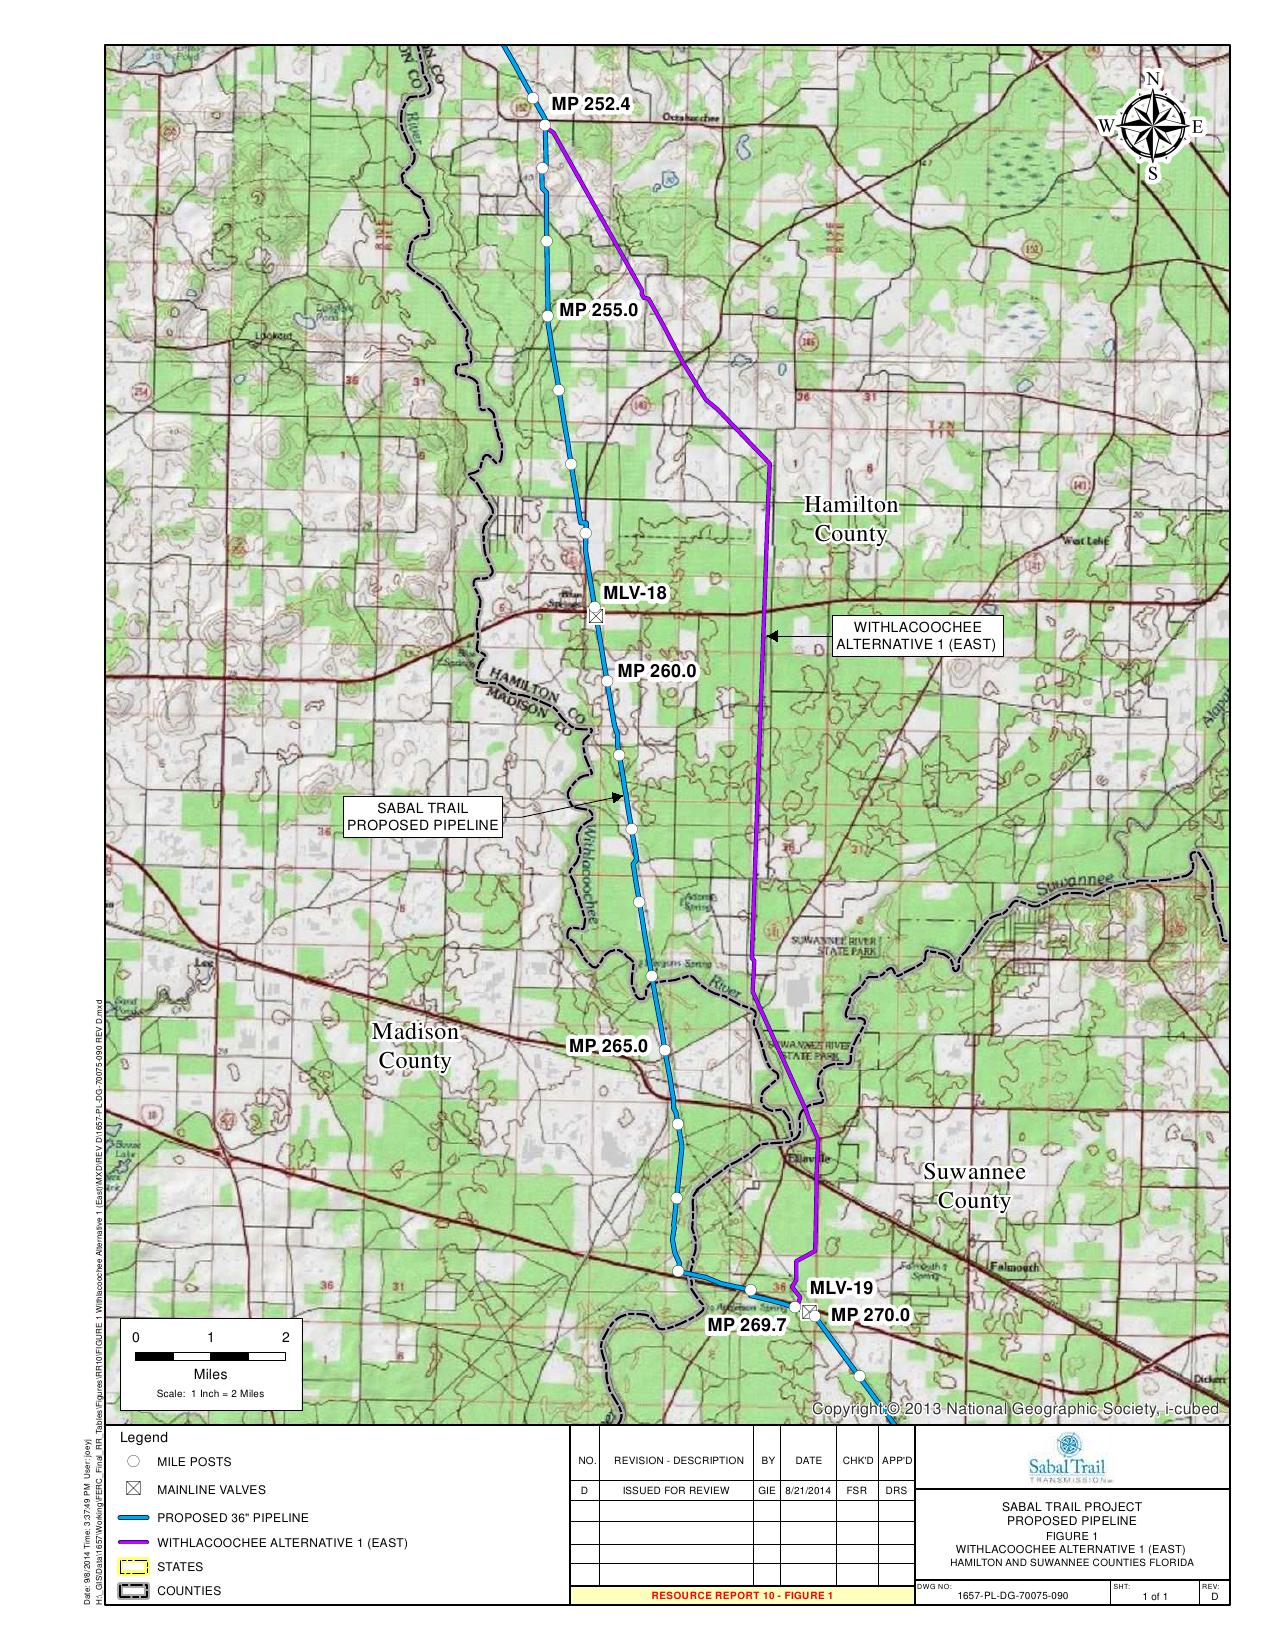 1275x1650 Withlacoochee Alternative 1 (East), in Response to FERC directive of 26 August 2014, by Sabal Trail Transmission, for SpectraBusters.org, 15 September 2014